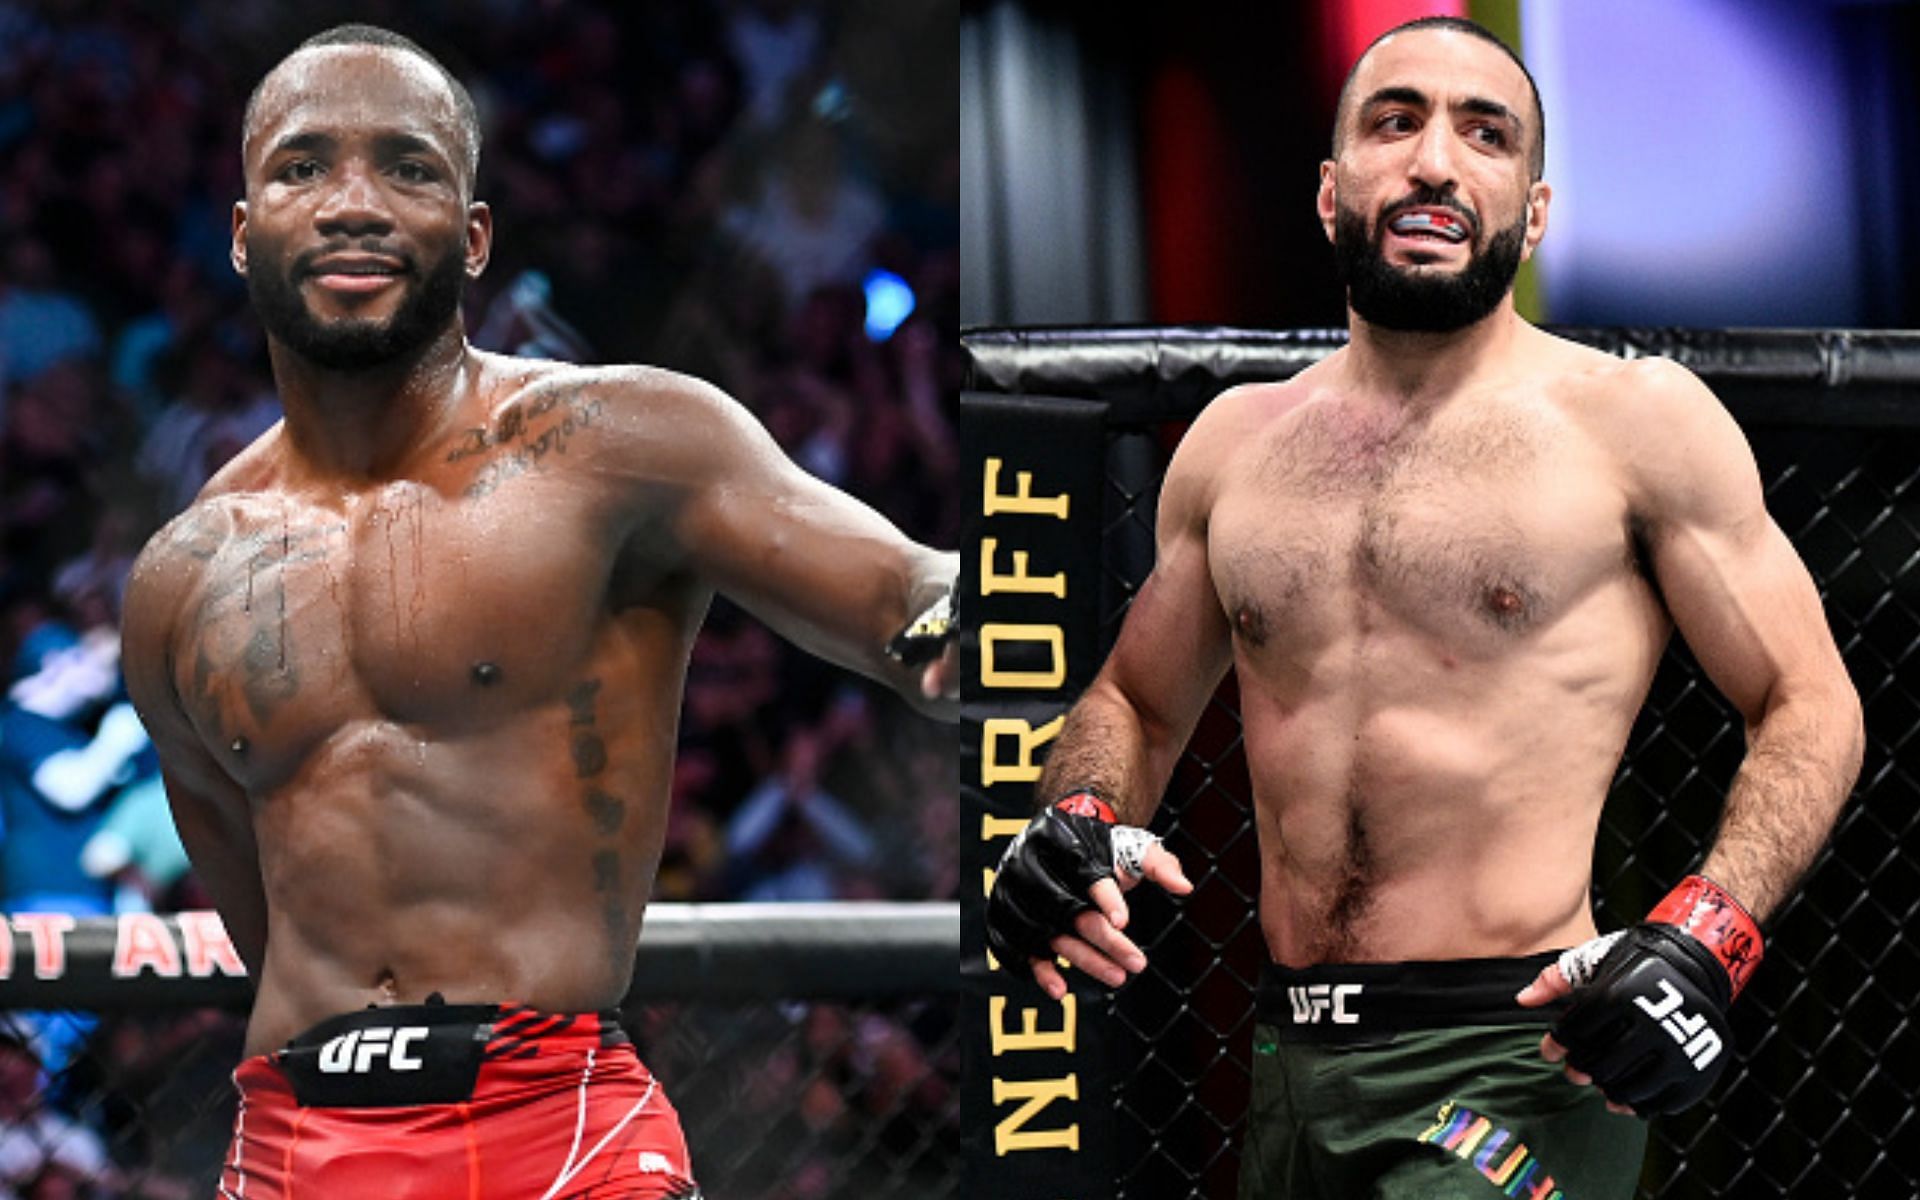 Leon Edwards (Left) and Belal Muhammad (Right)(Images via Getty)